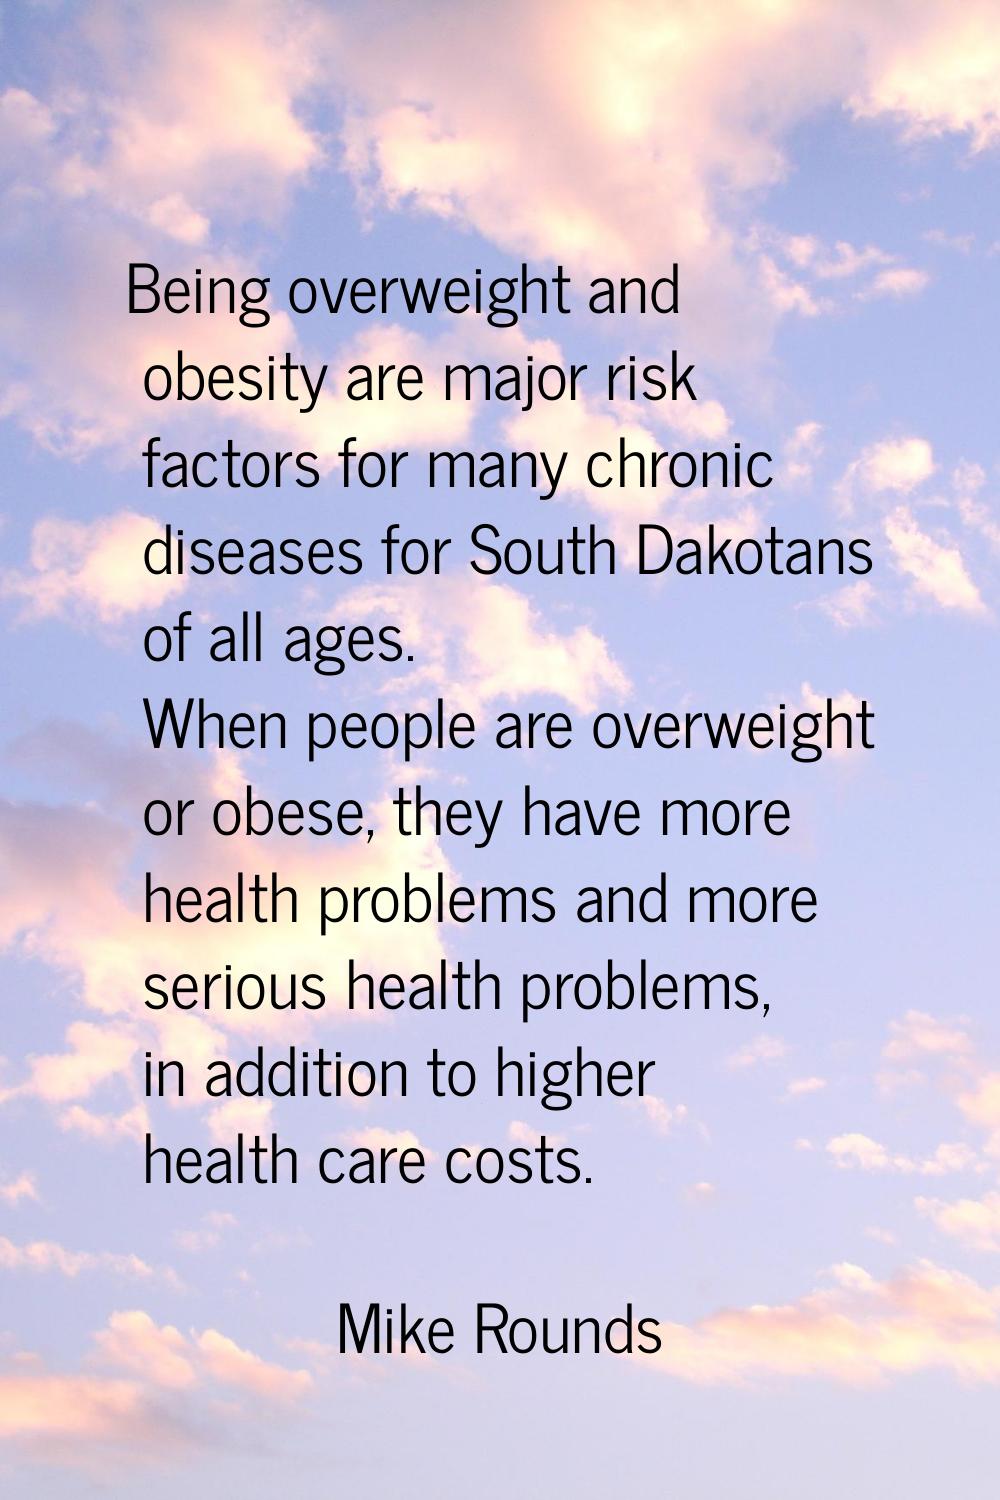 Being overweight and obesity are major risk factors for many chronic diseases for South Dakotans of